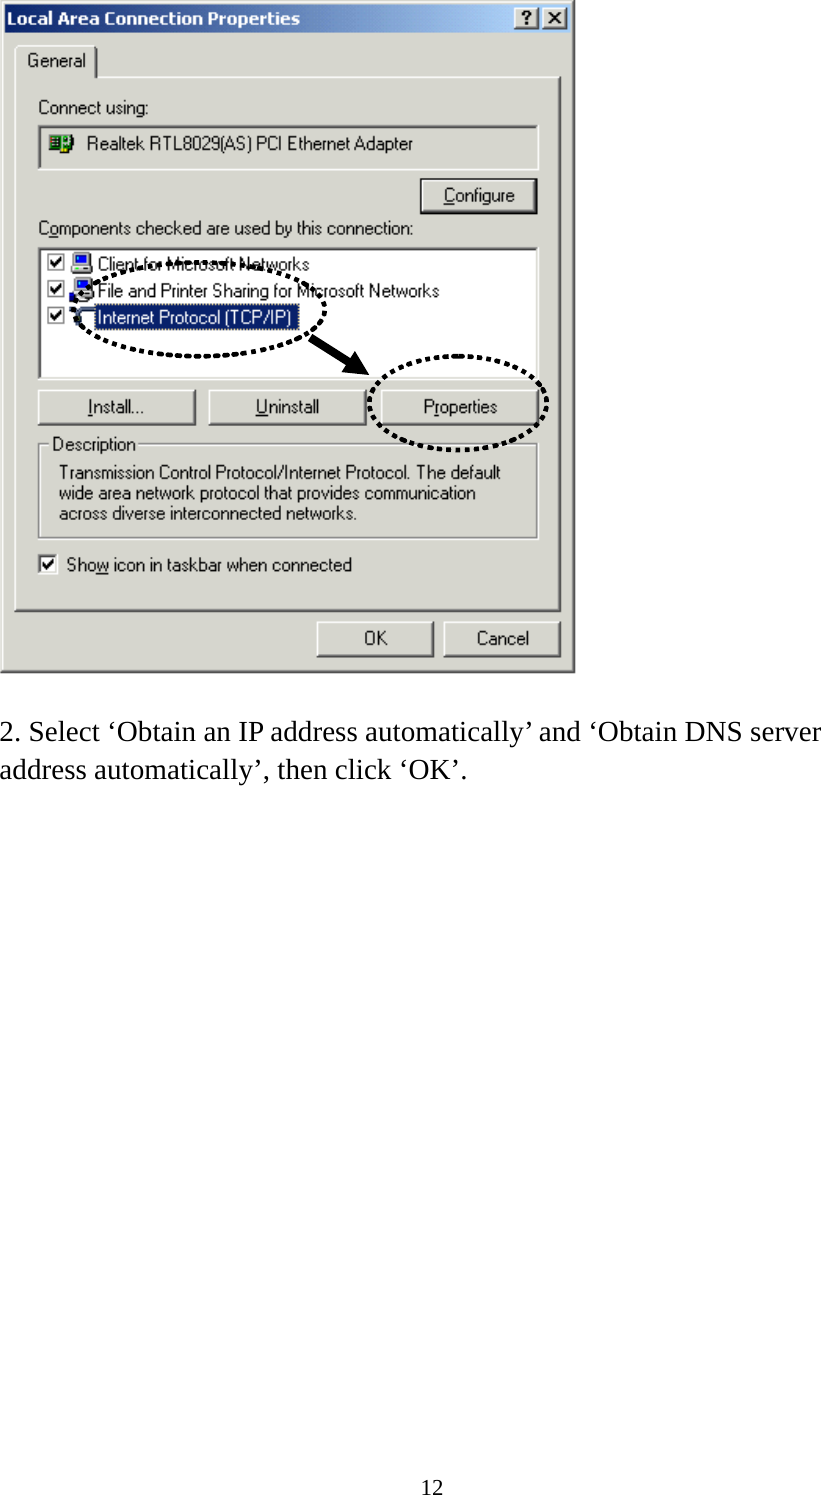 12   2. Select ‘Obtain an IP address automatically’ and ‘Obtain DNS server address automatically’, then click ‘OK’.  